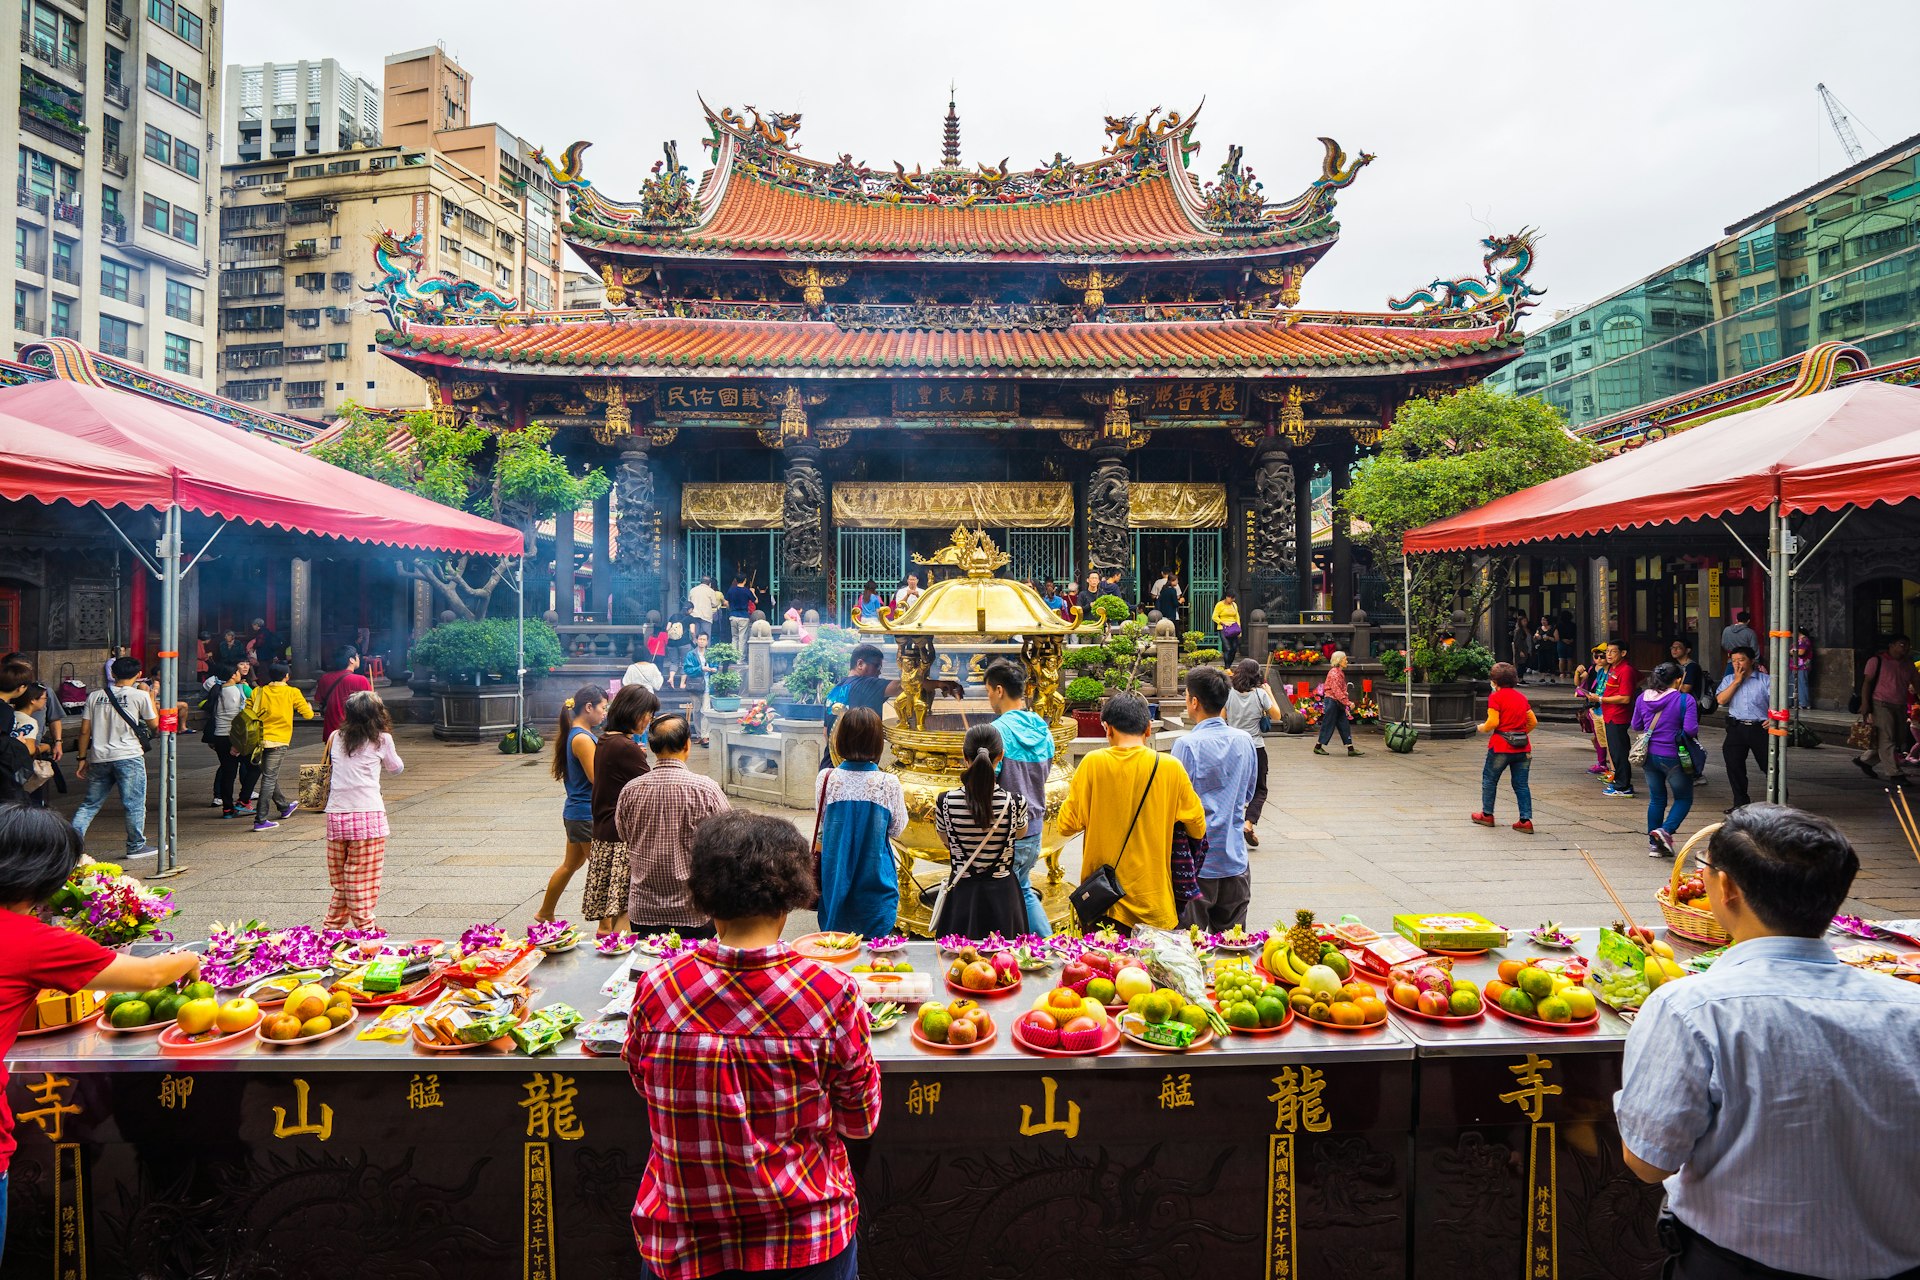 Visitors stand in front of tables with offerings of fruit on them in a temple courtyard